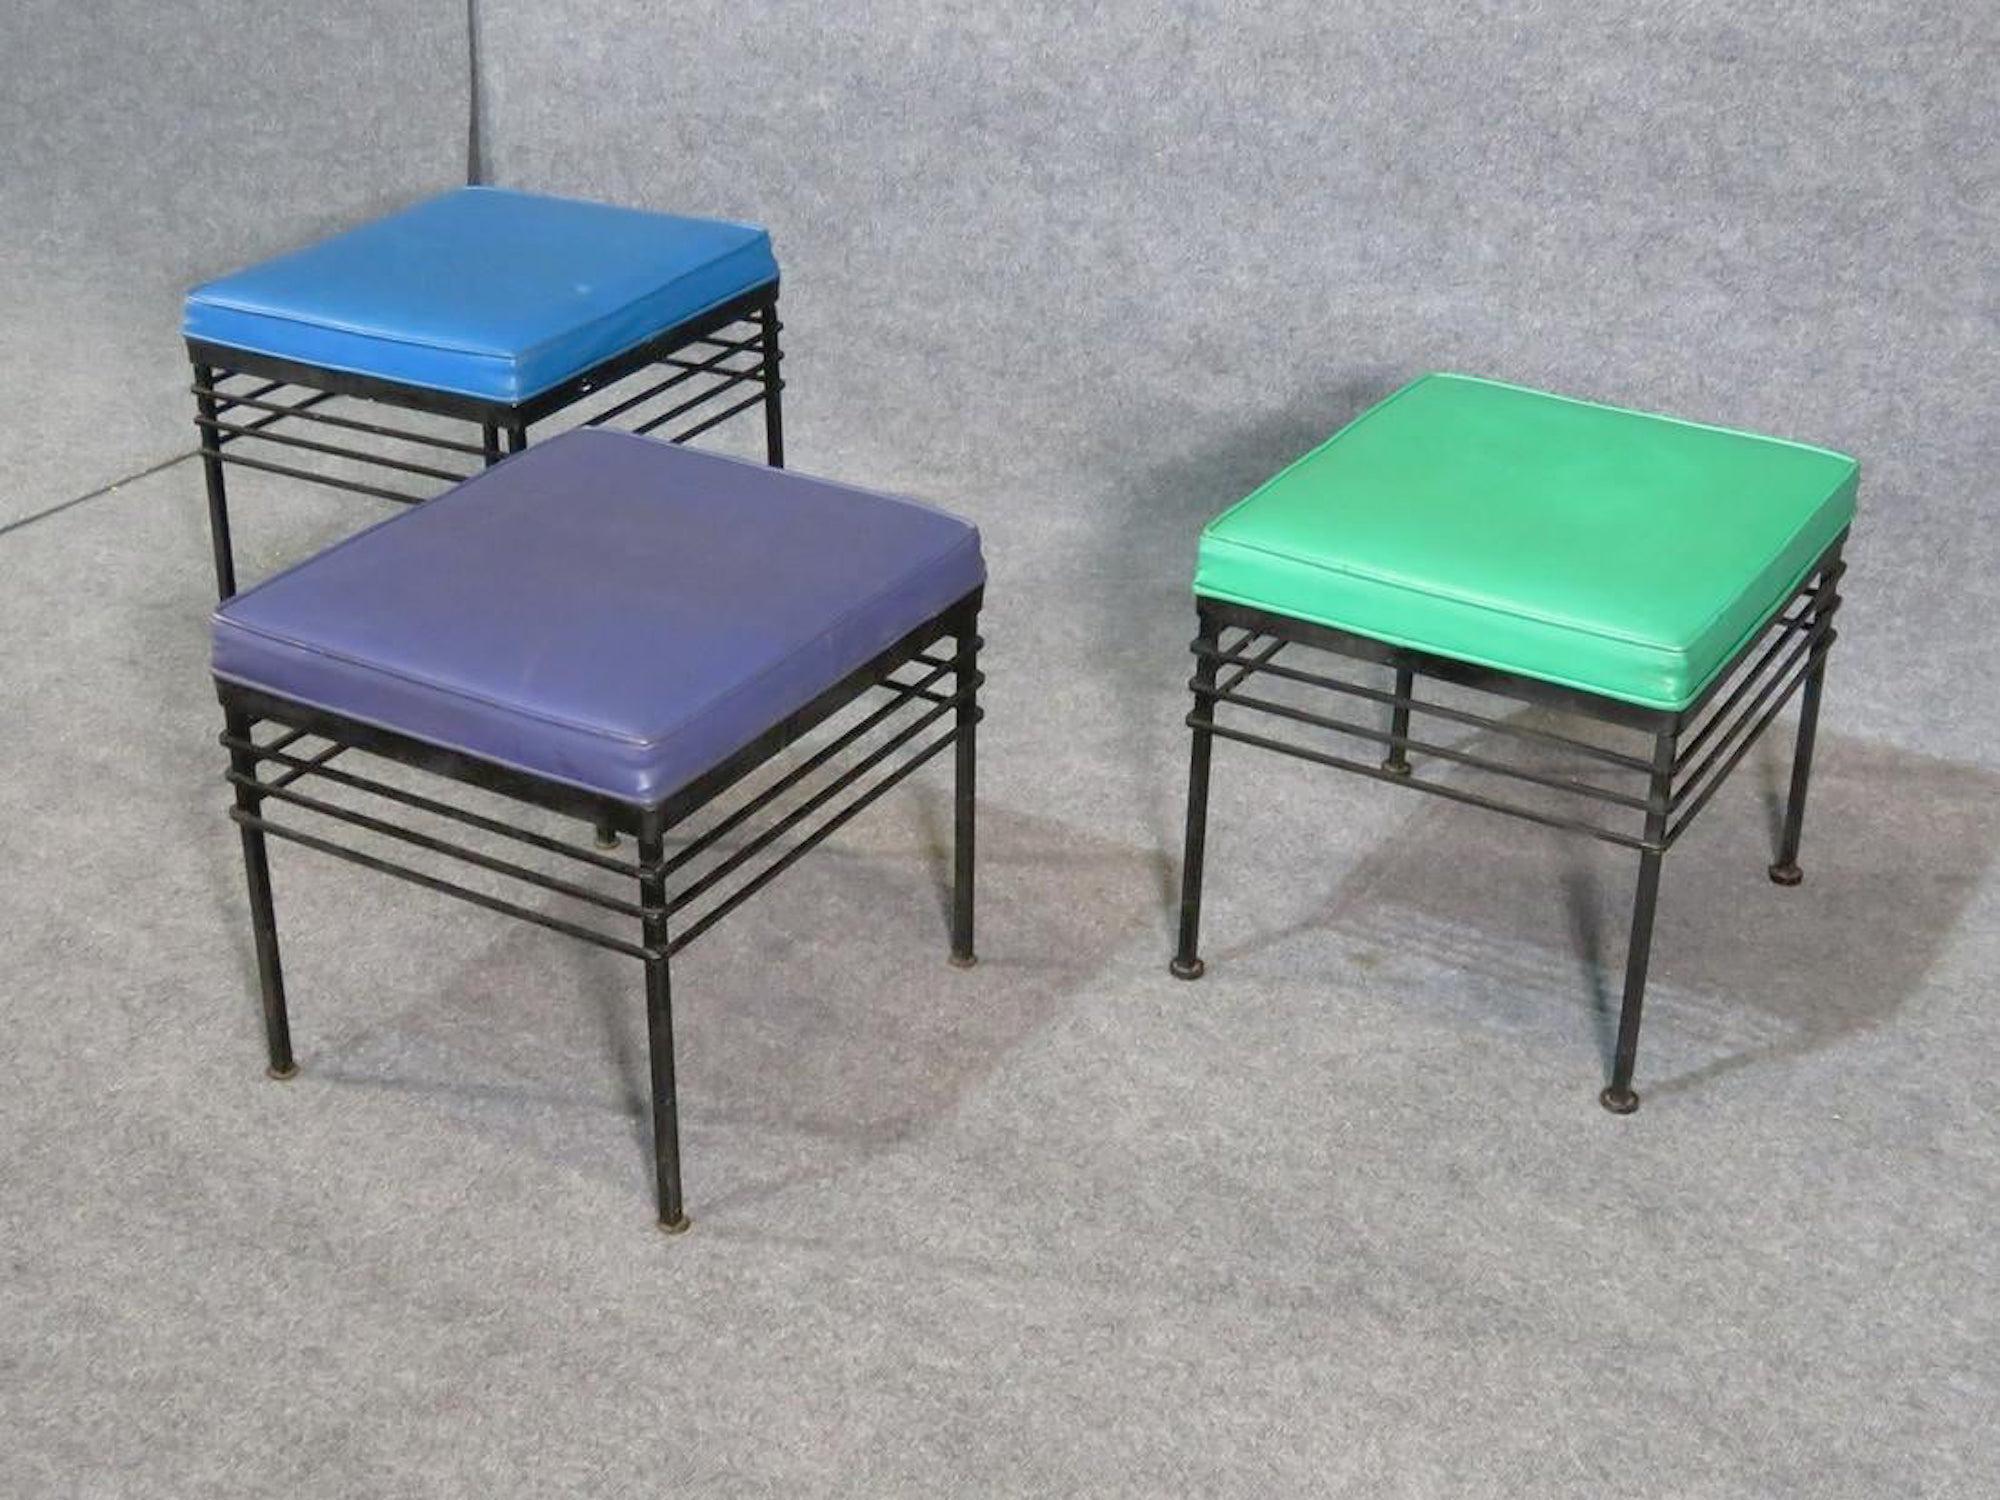 Vintage modern Paul McCobb style footstools with iron frames and thick colored cushions.
(Please confirm item location - NY or NJ - with dealer).
   